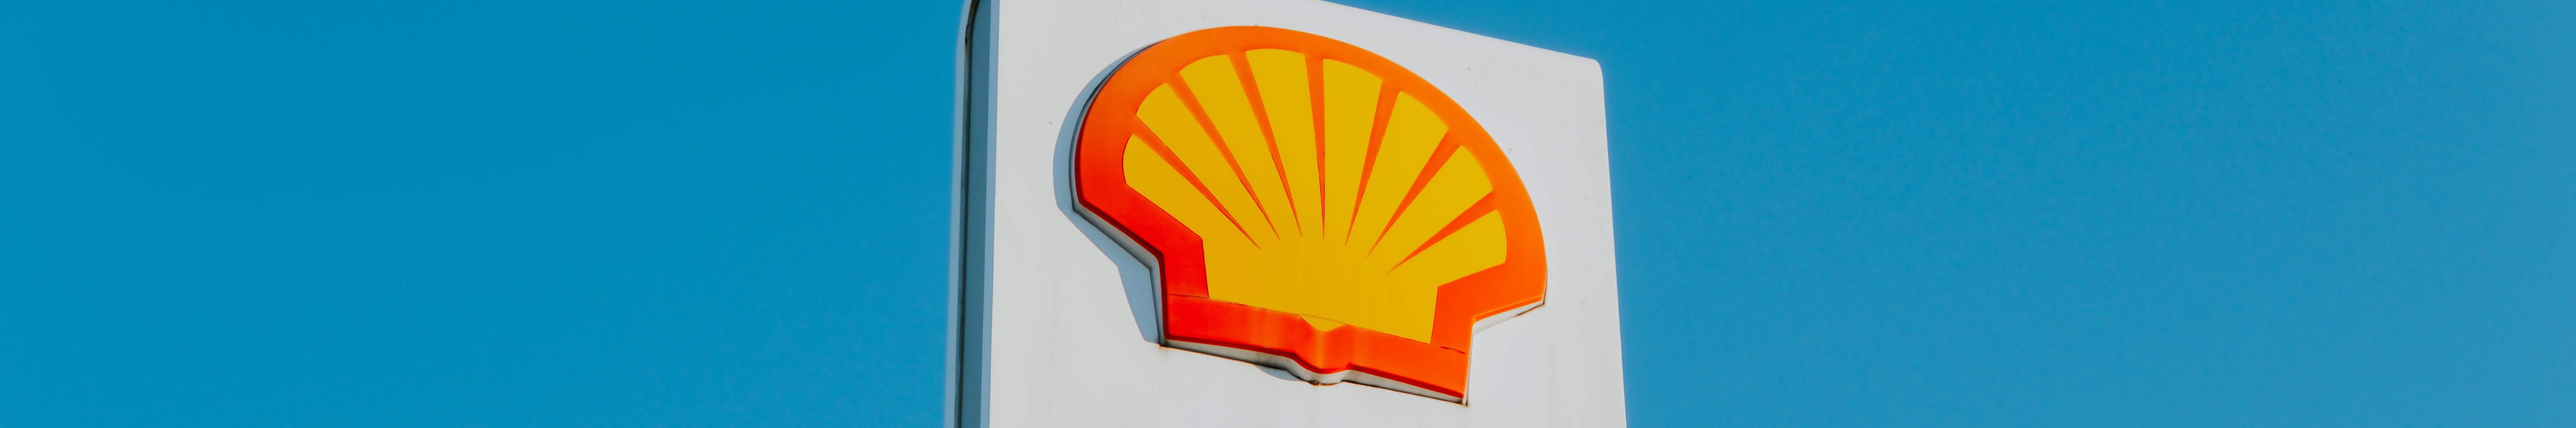 Royal Dutch Shell reported 0 fatalities (7 in 2019) and 94 incidents in 2020